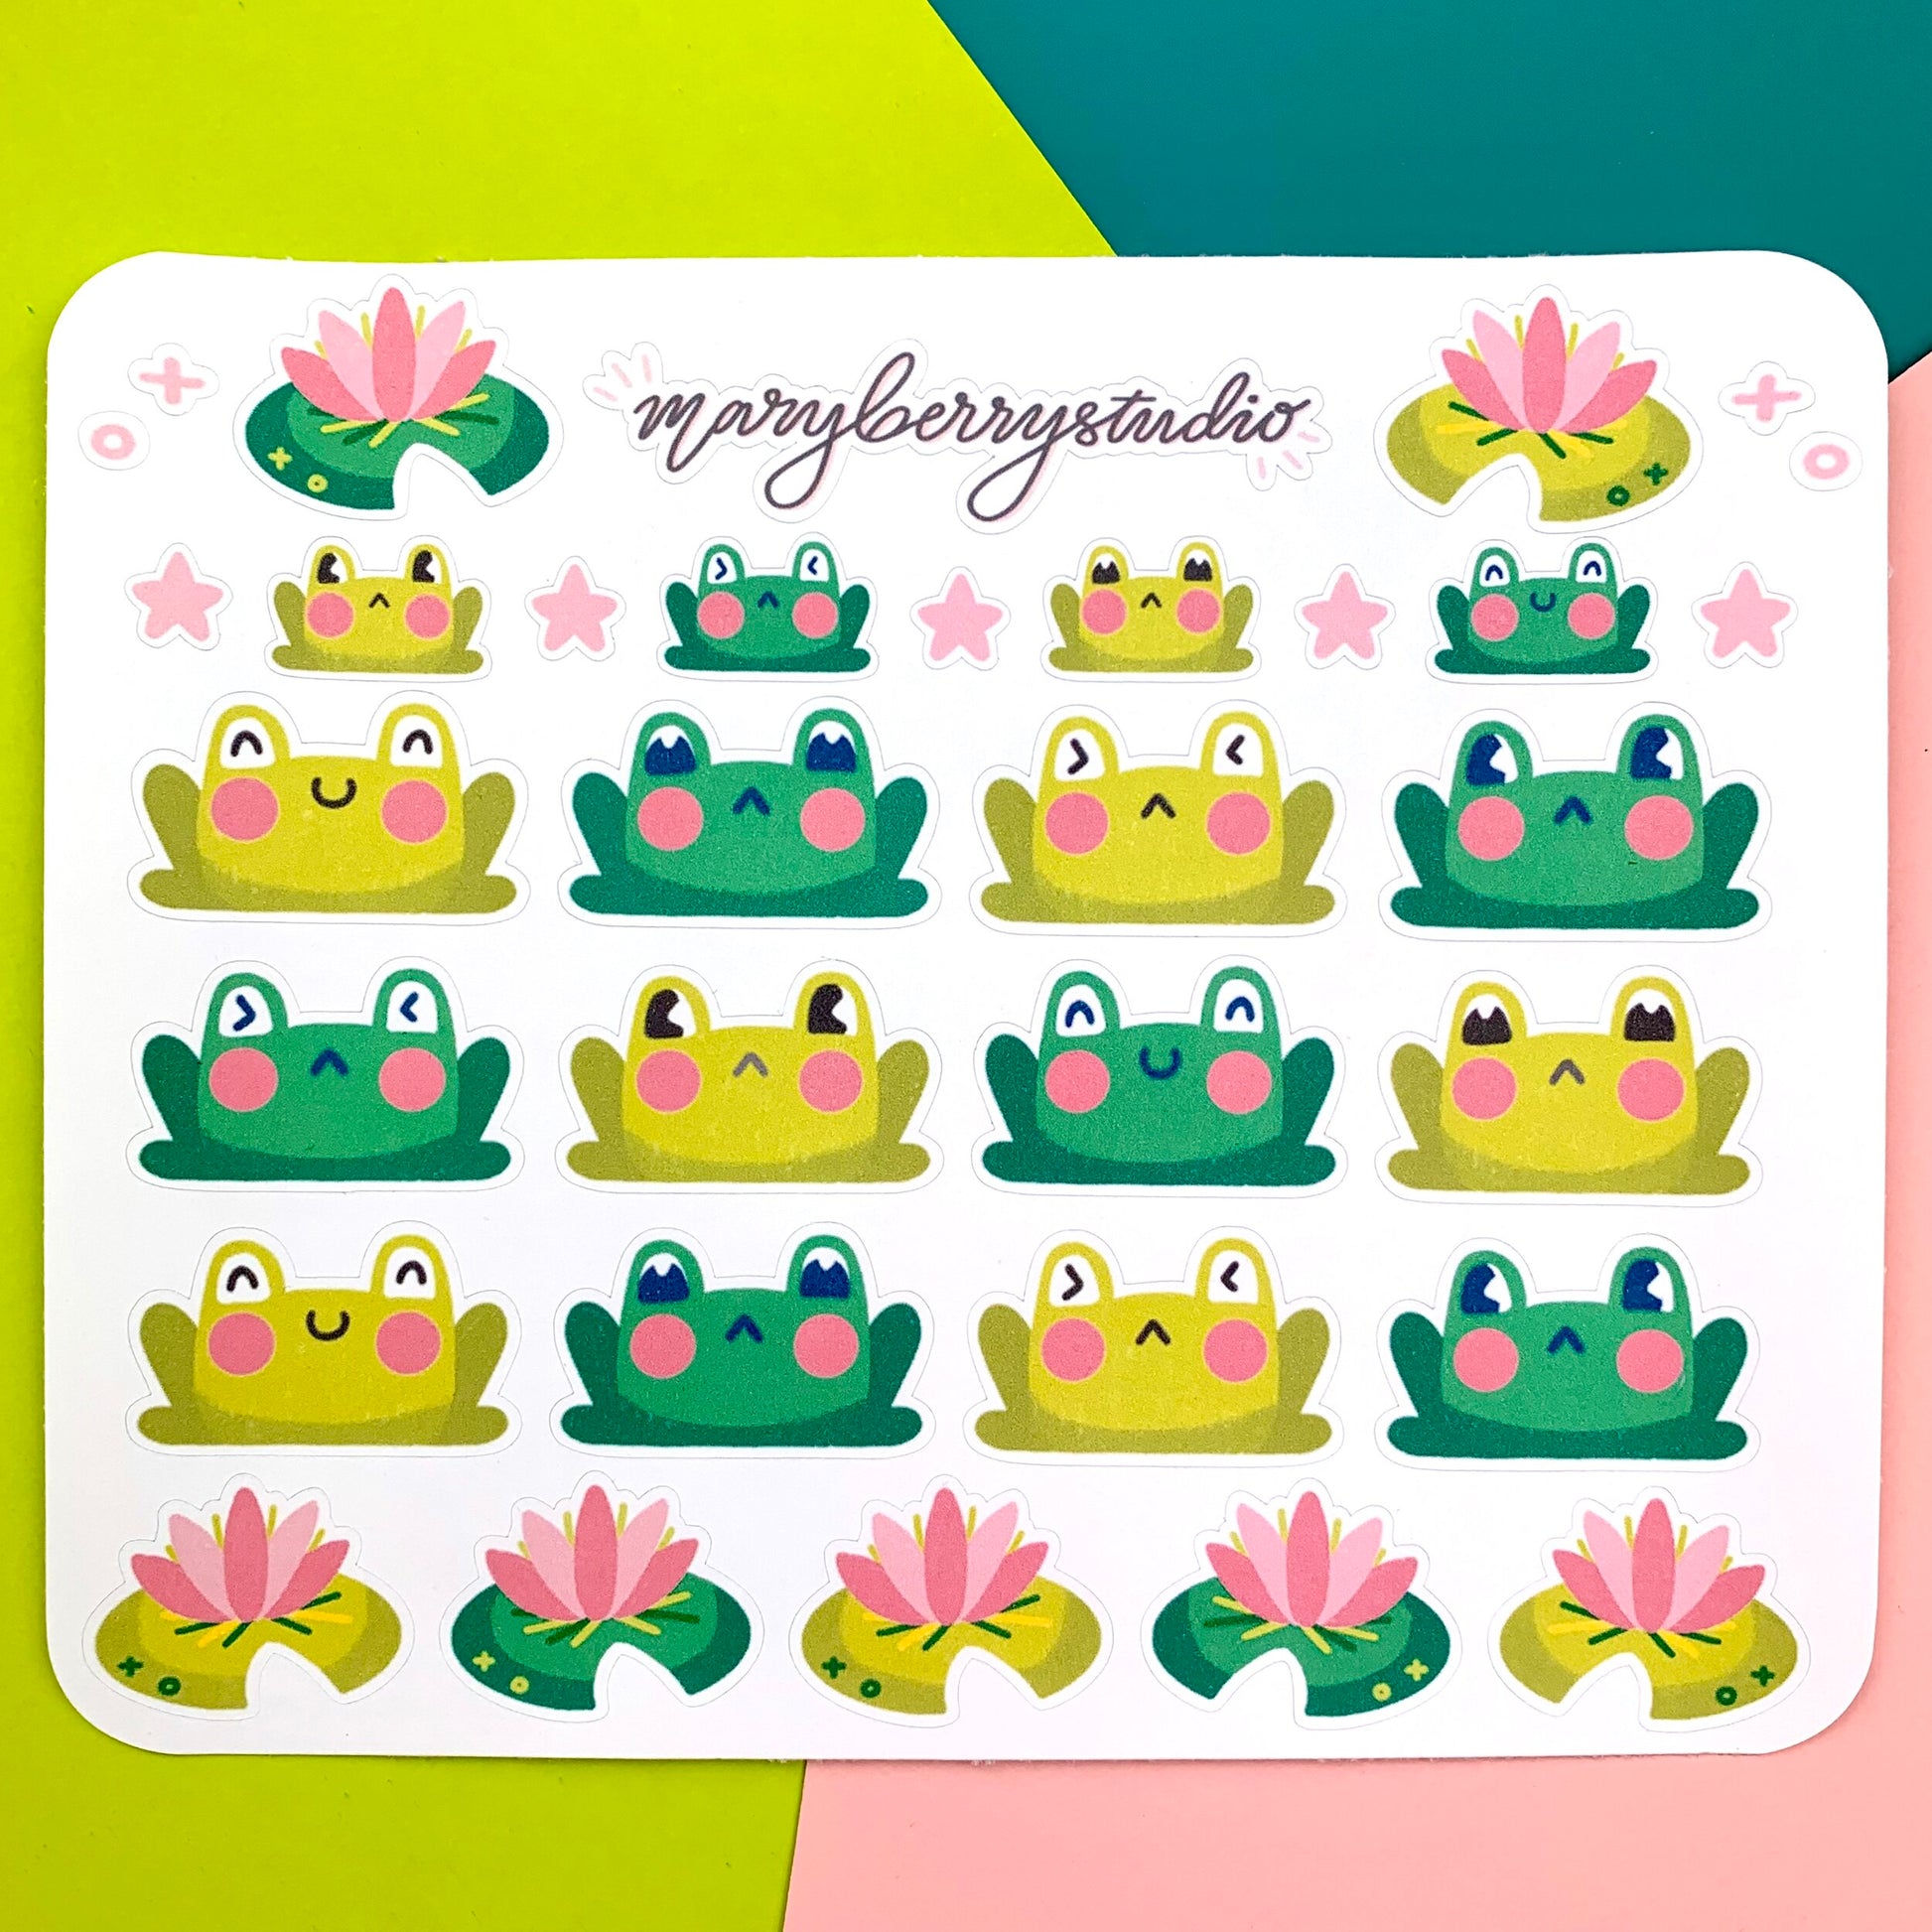 Frog and Pond Sticker Sheet | For bullet journals, stationery supplies, notes, &amp; decoration